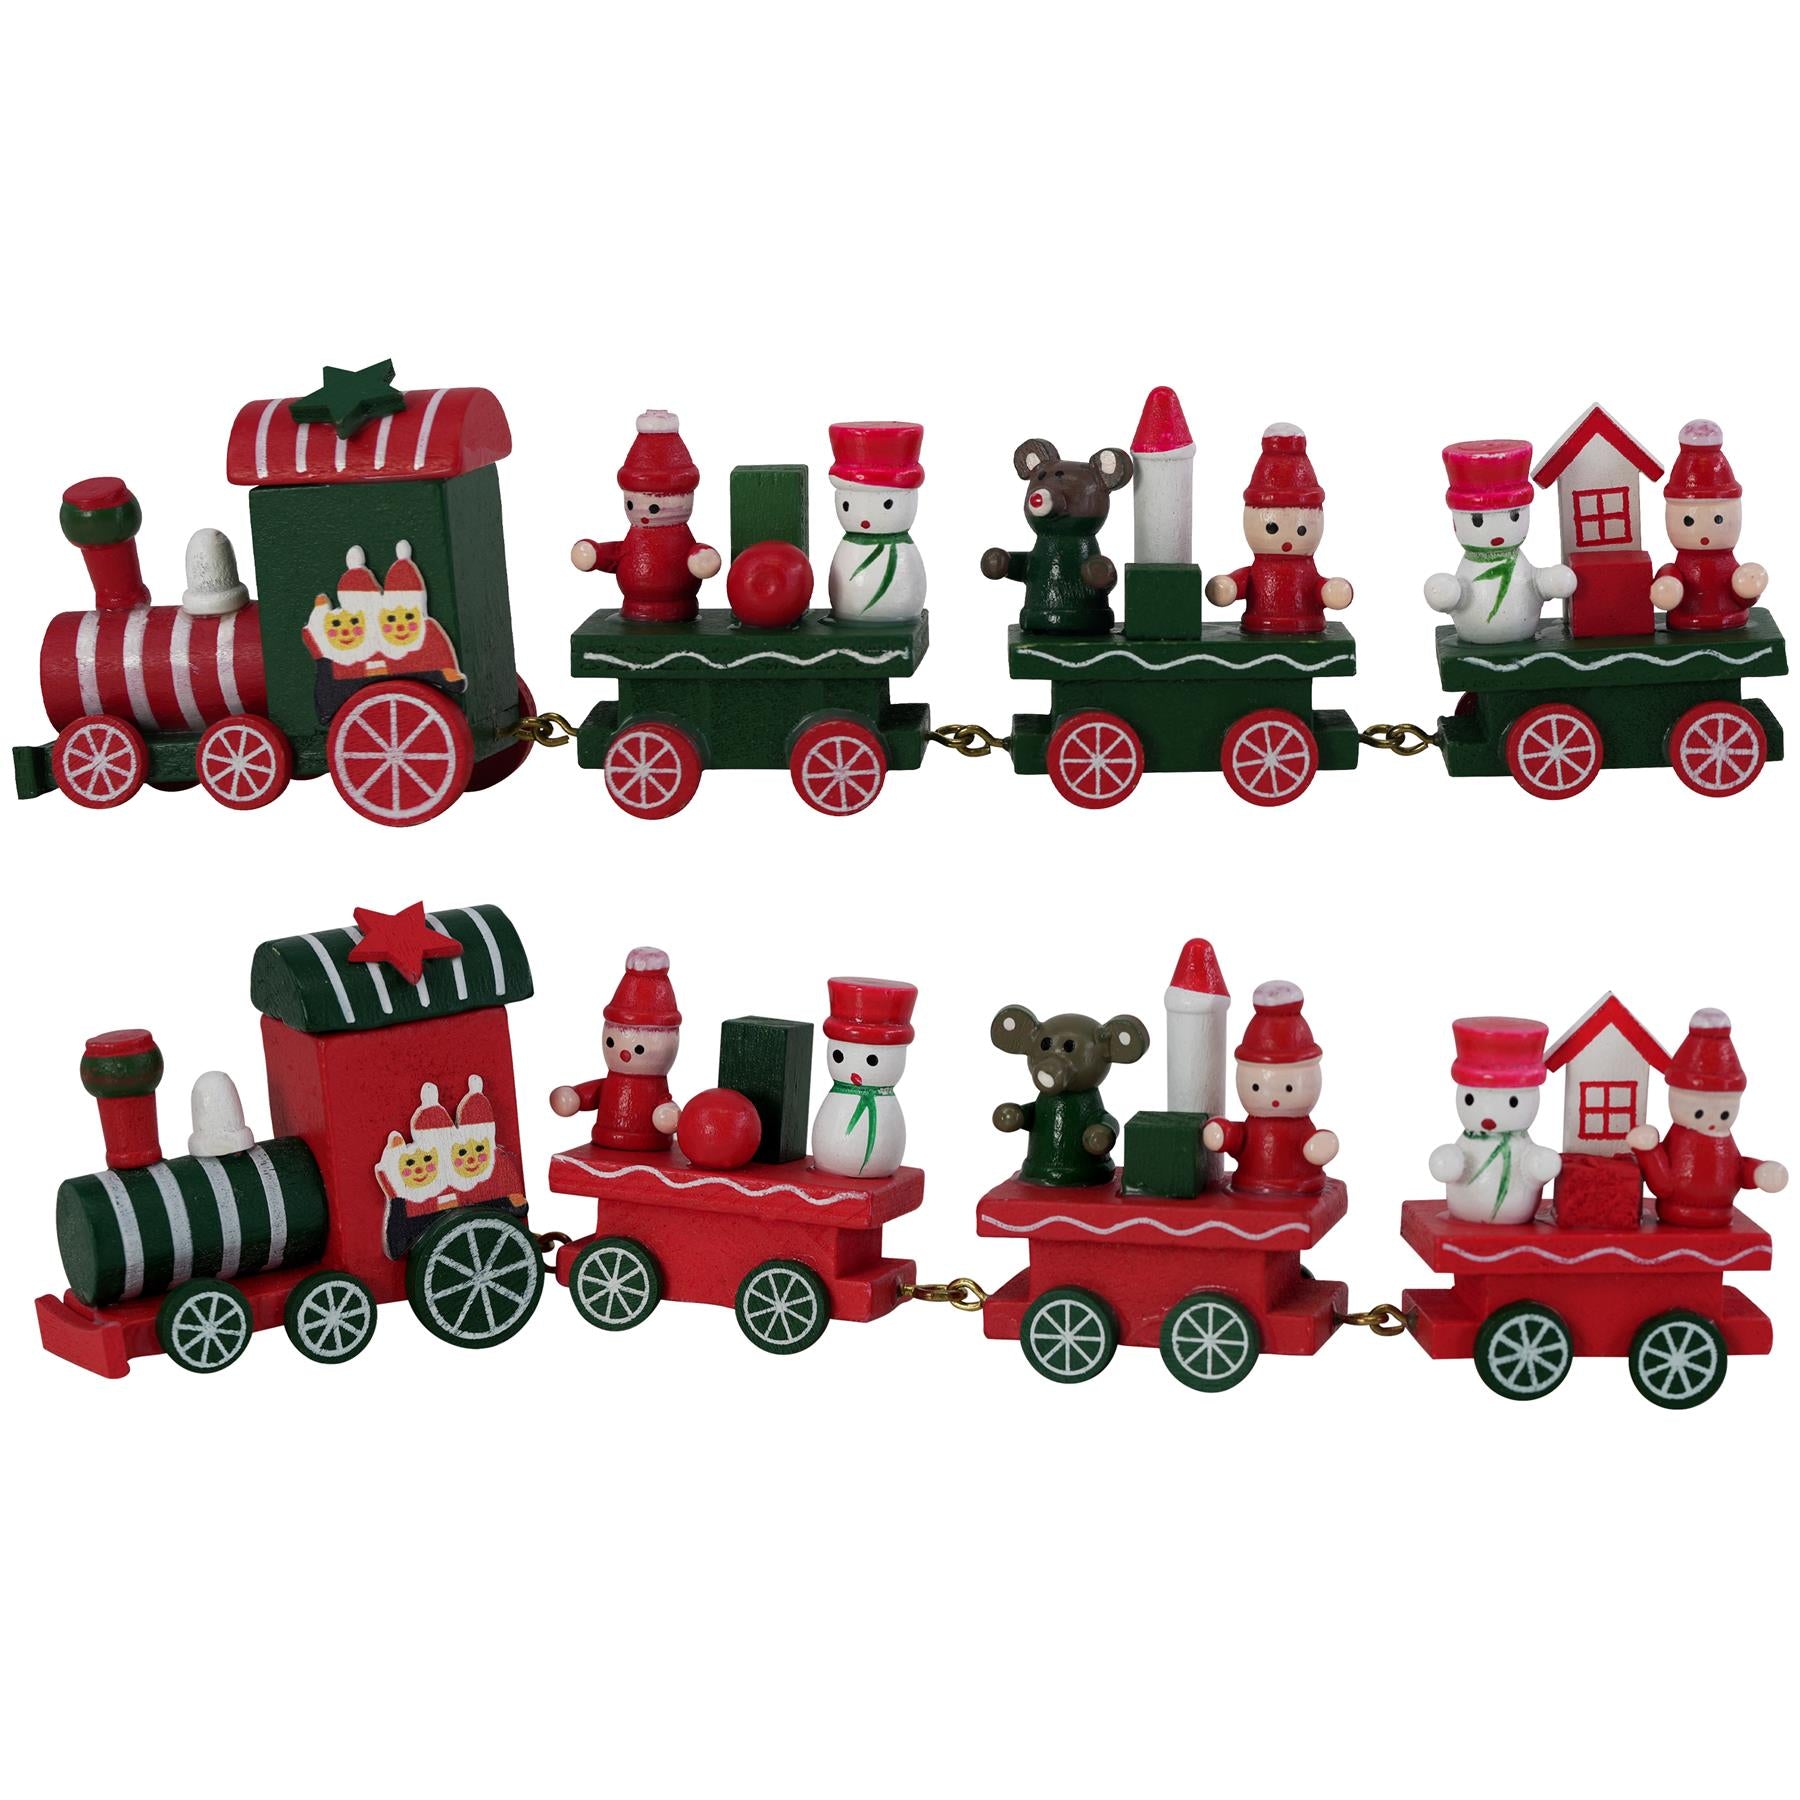 Christmas Train by The Magic Toy Shop - The Magic Toy Shop